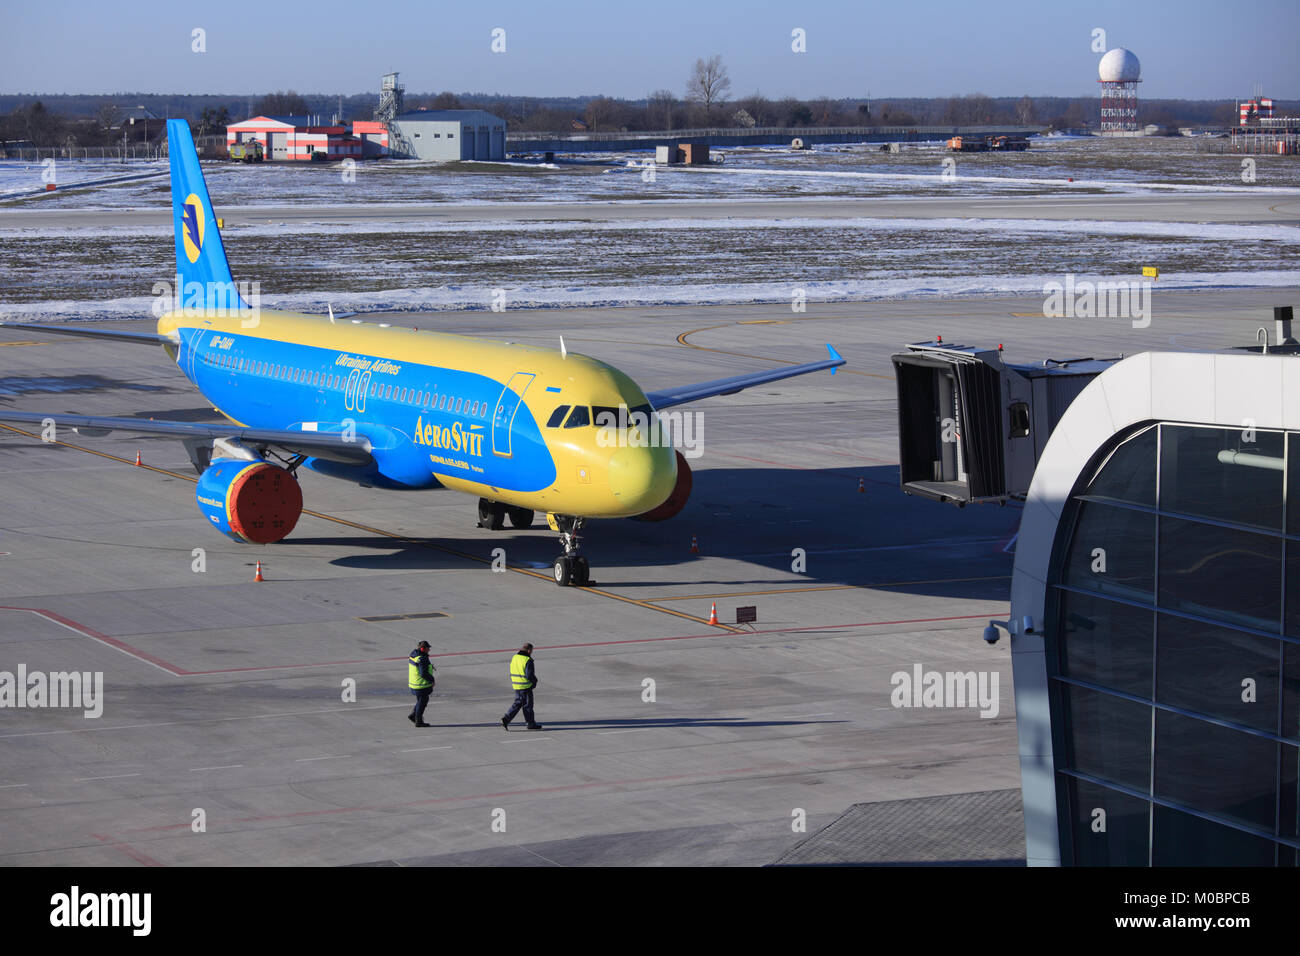 LVOV, UKRAINE - DECEMBER 31: Liner of Ukrainian Aerosvit airlines company on December 31, 2012 in Lvov Airport. Many Aerosvit liners was delayed due t Stock Photo